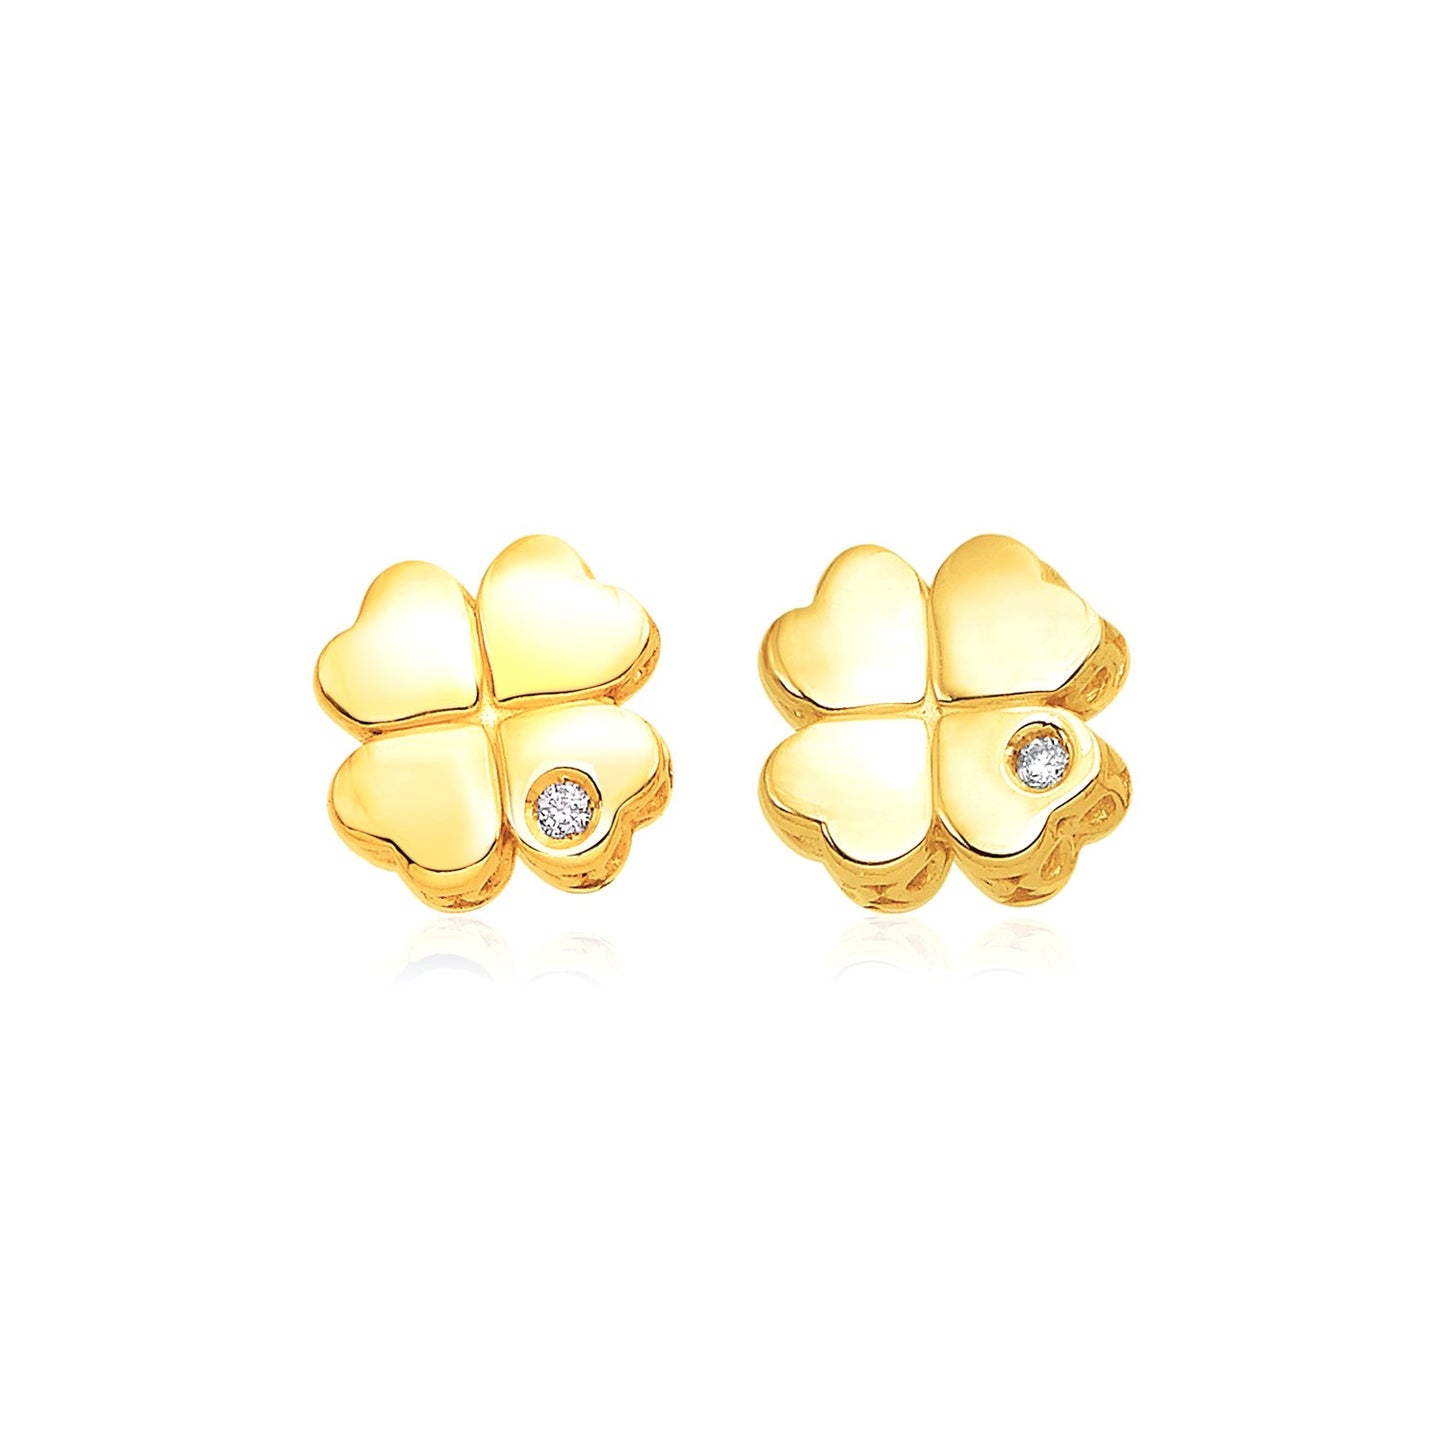 14k Yellow Gold Polished Four Leaf Clover Earrings with Diamonds(7mm)